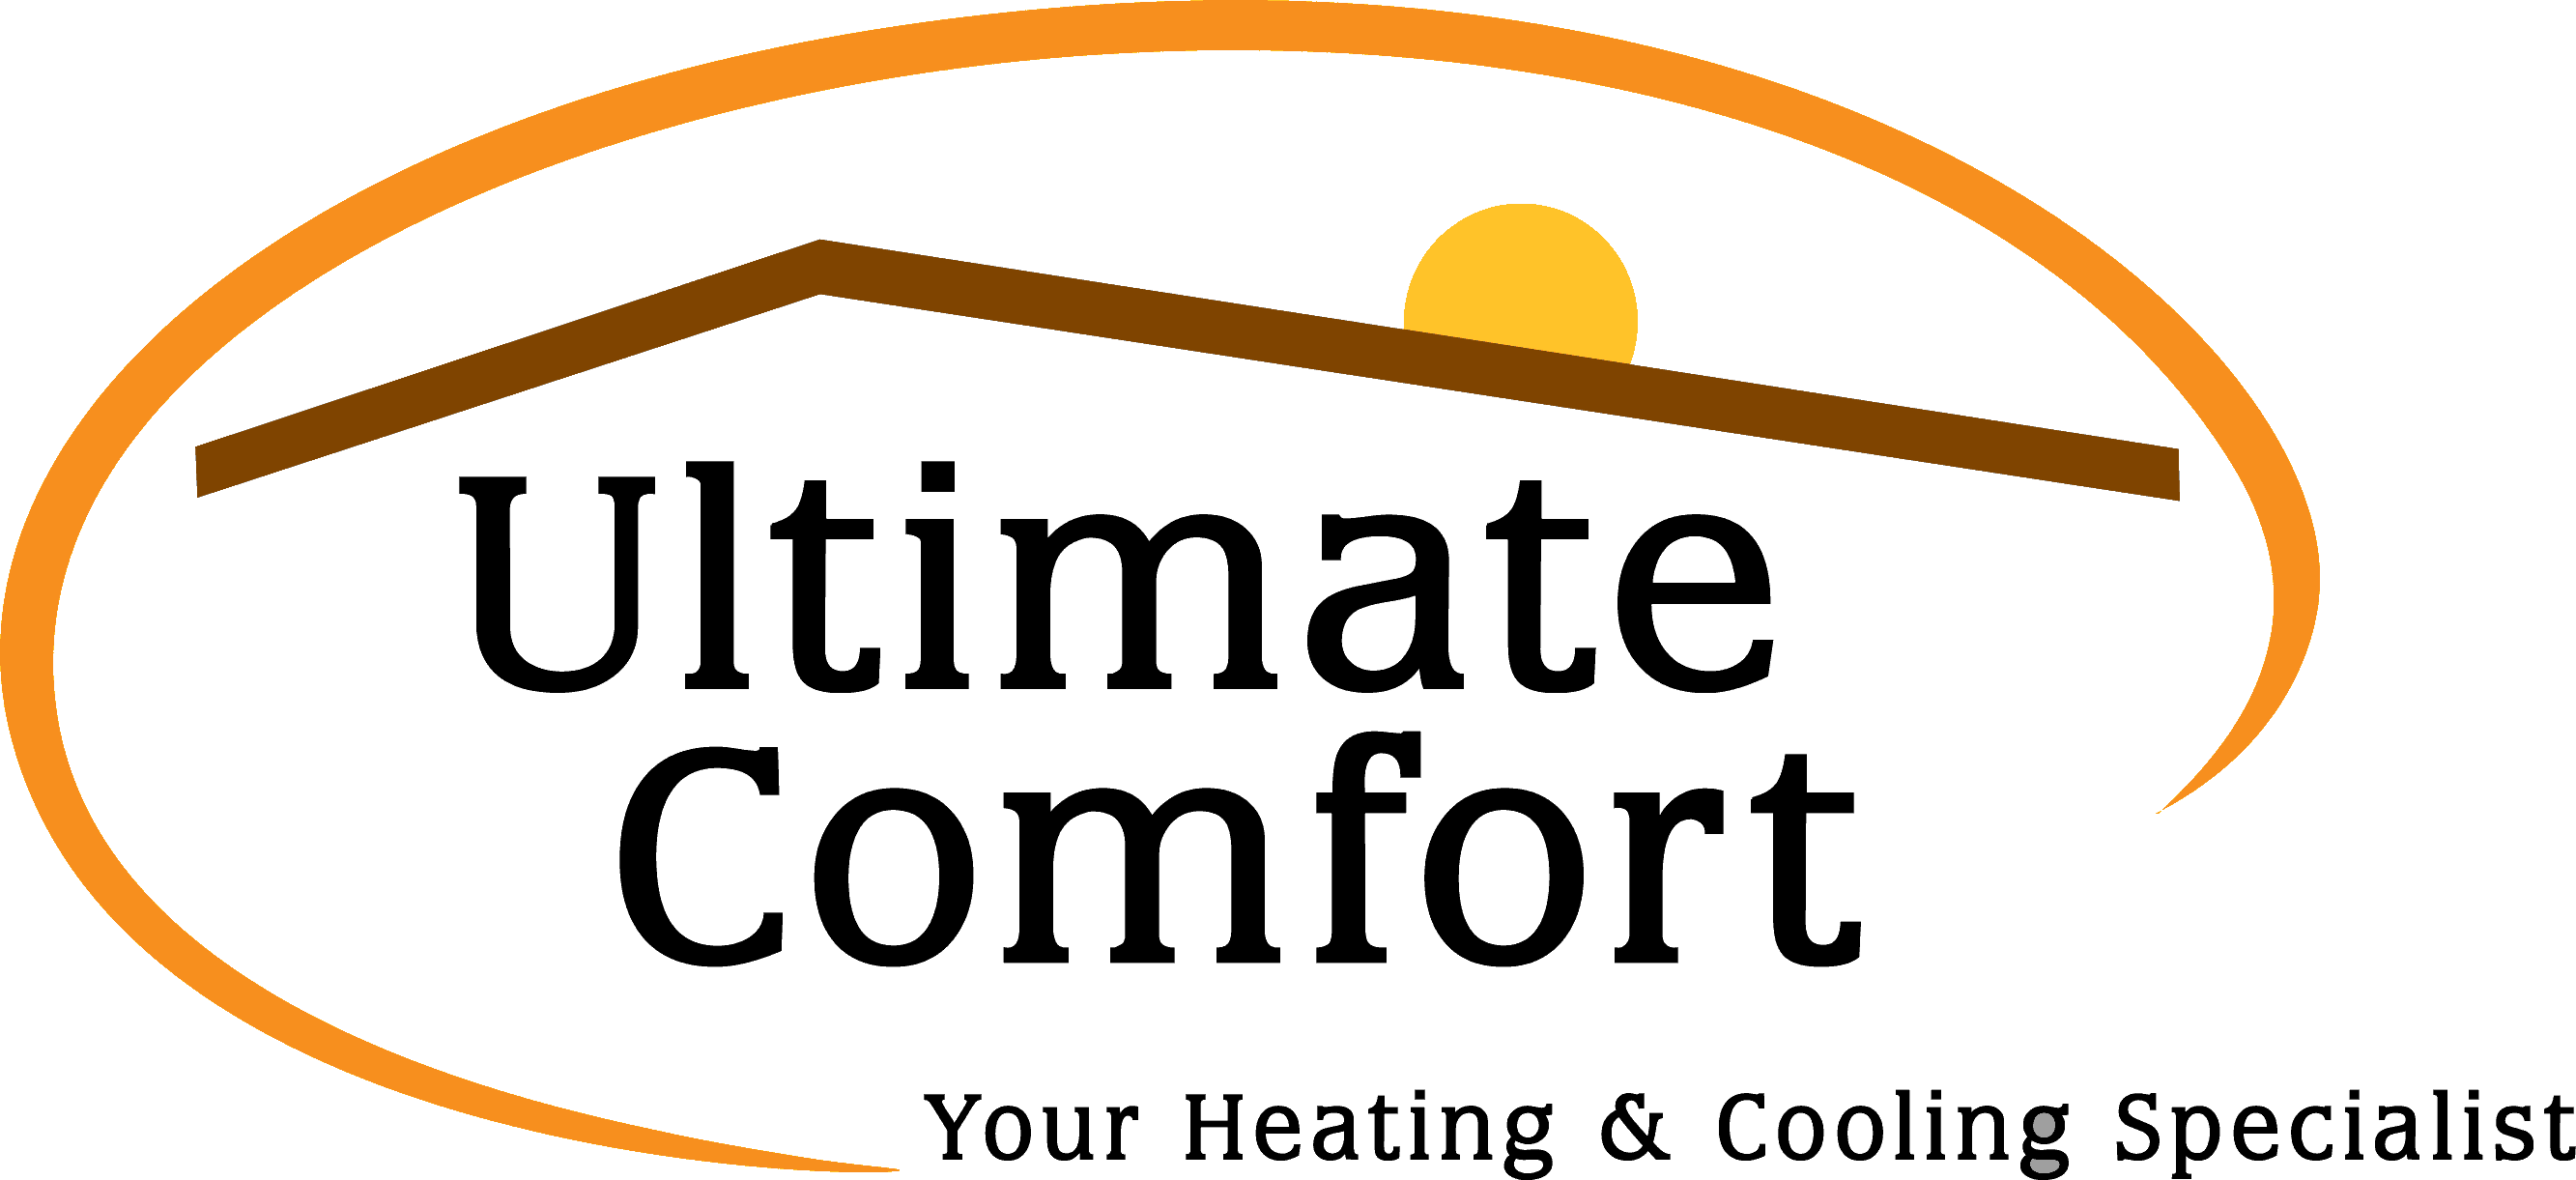 http://www.ultimatecomfortheating.com/wp-content/uploads/2020/05/cropped-Ultimate-Comfort-logo-transparent.png